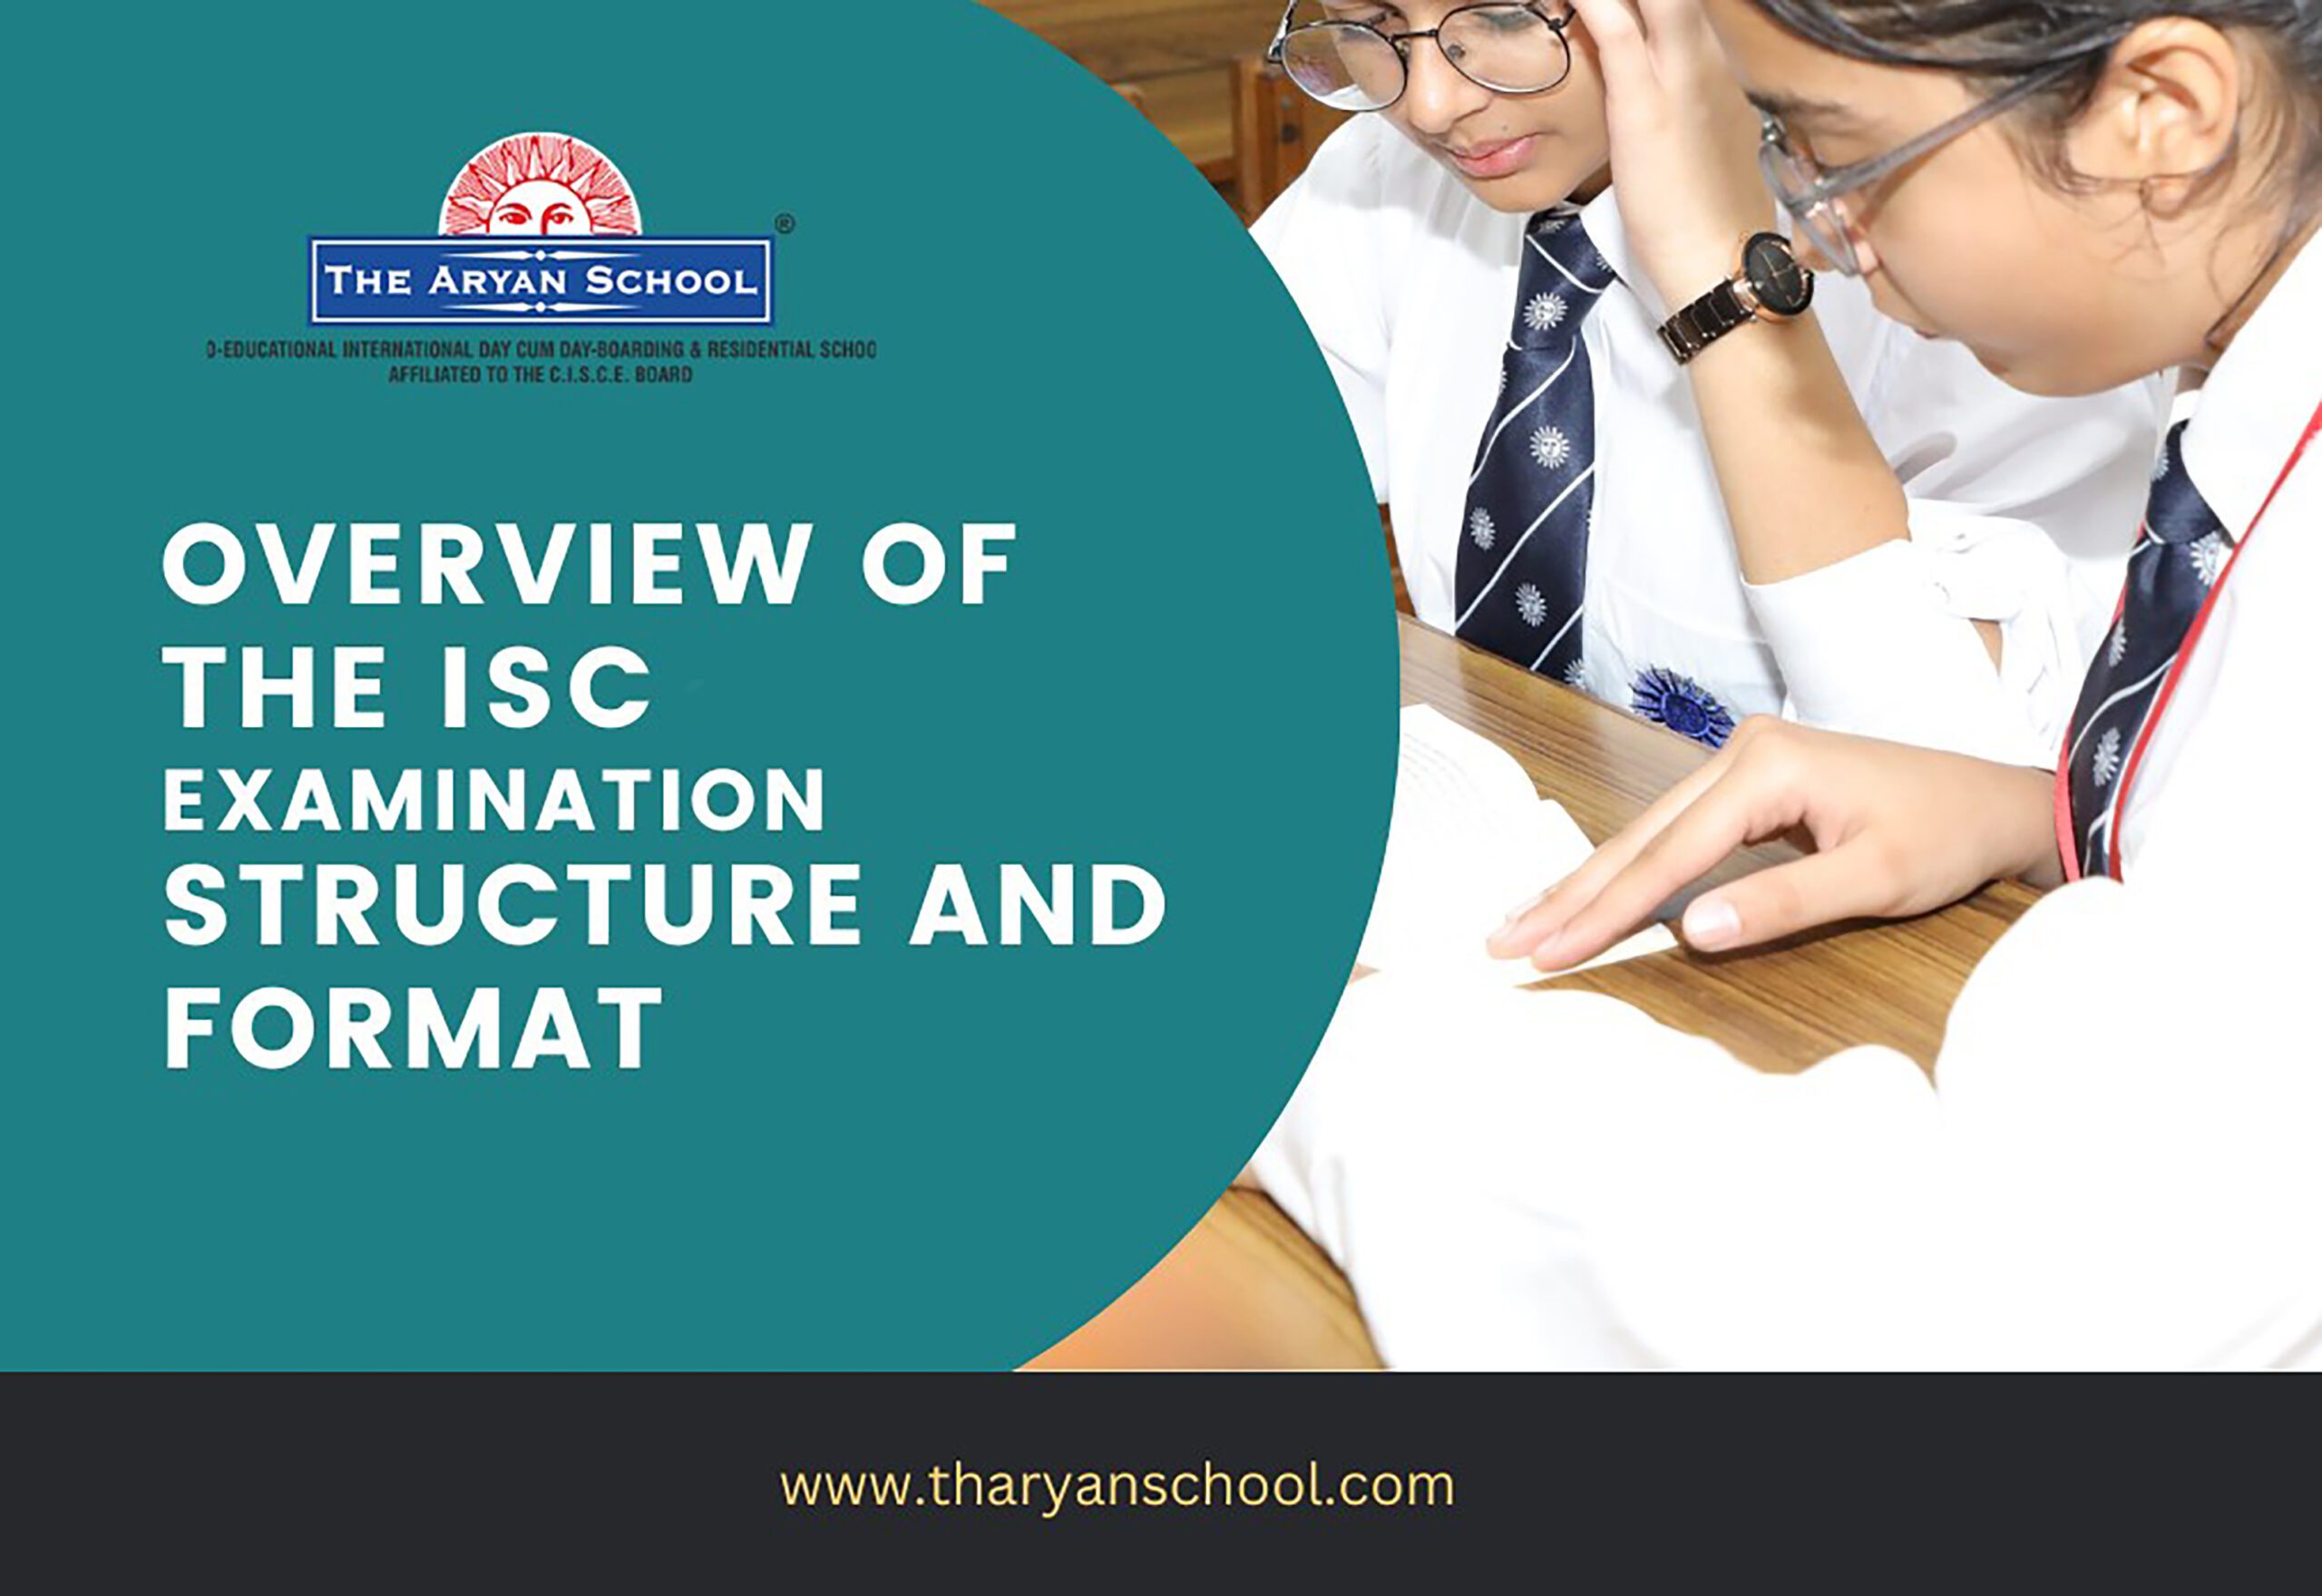 Overview of the ISC Examination Structure and Format